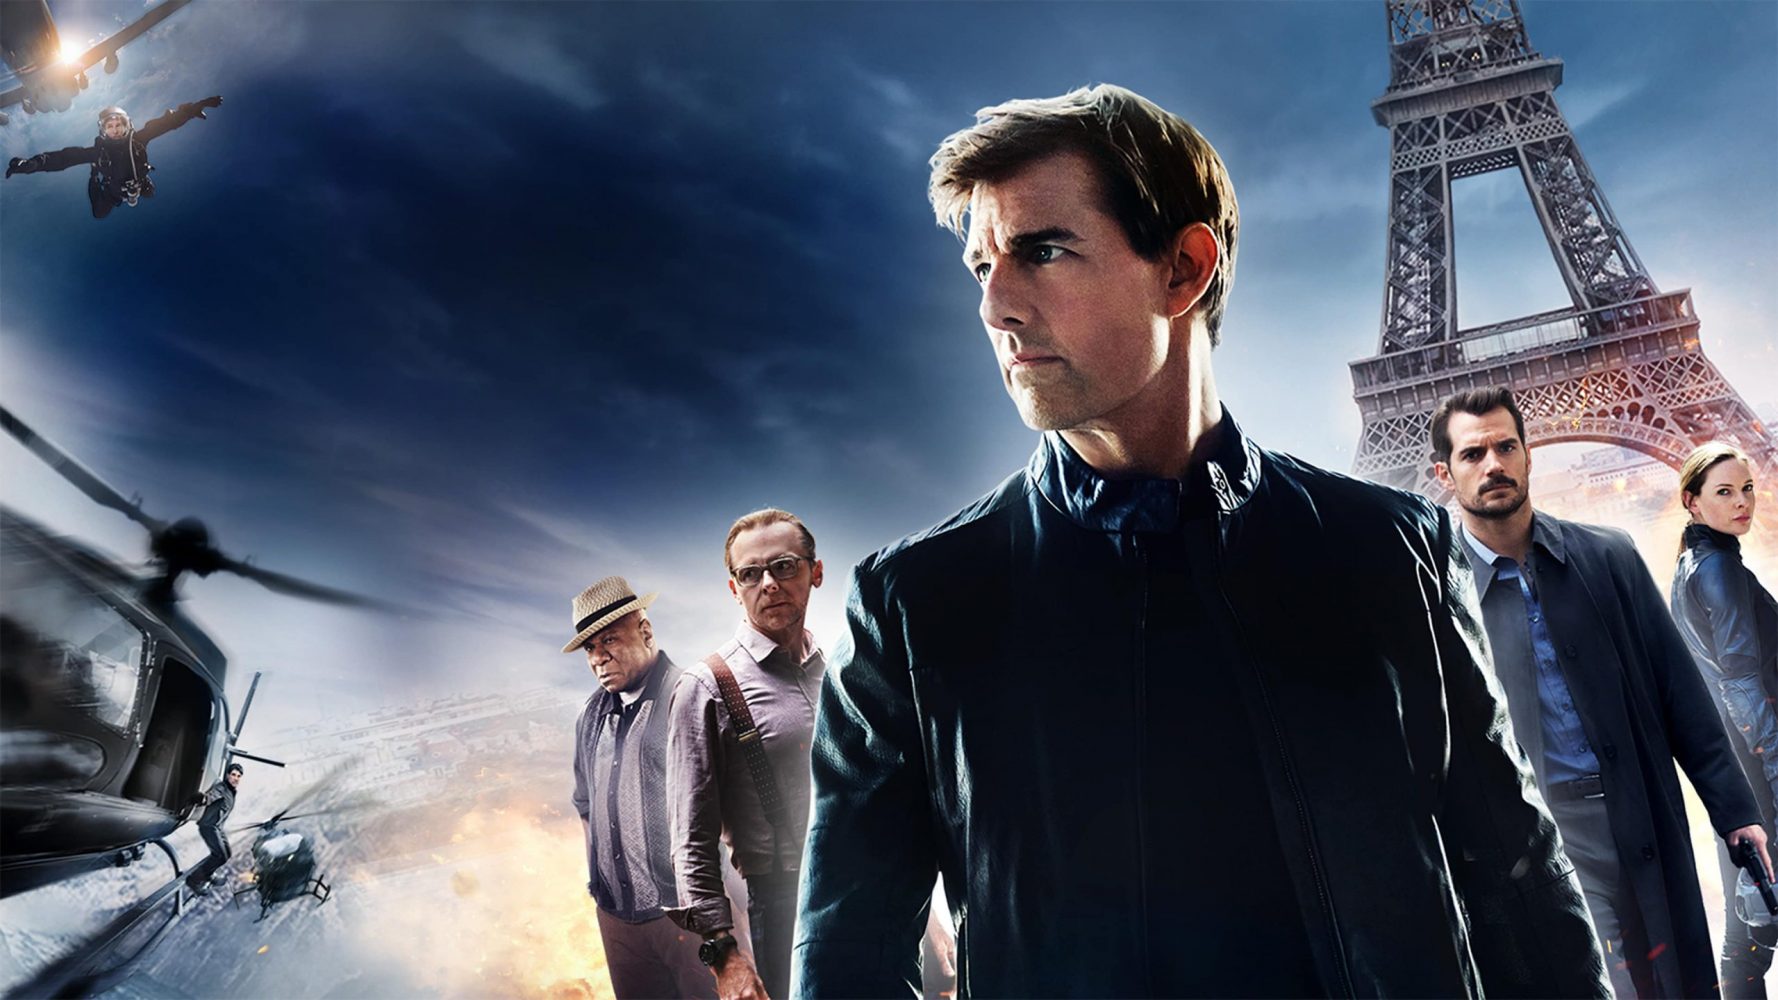 Mission Impossible: Fallout - Mission Impossible: Fallout (2018)